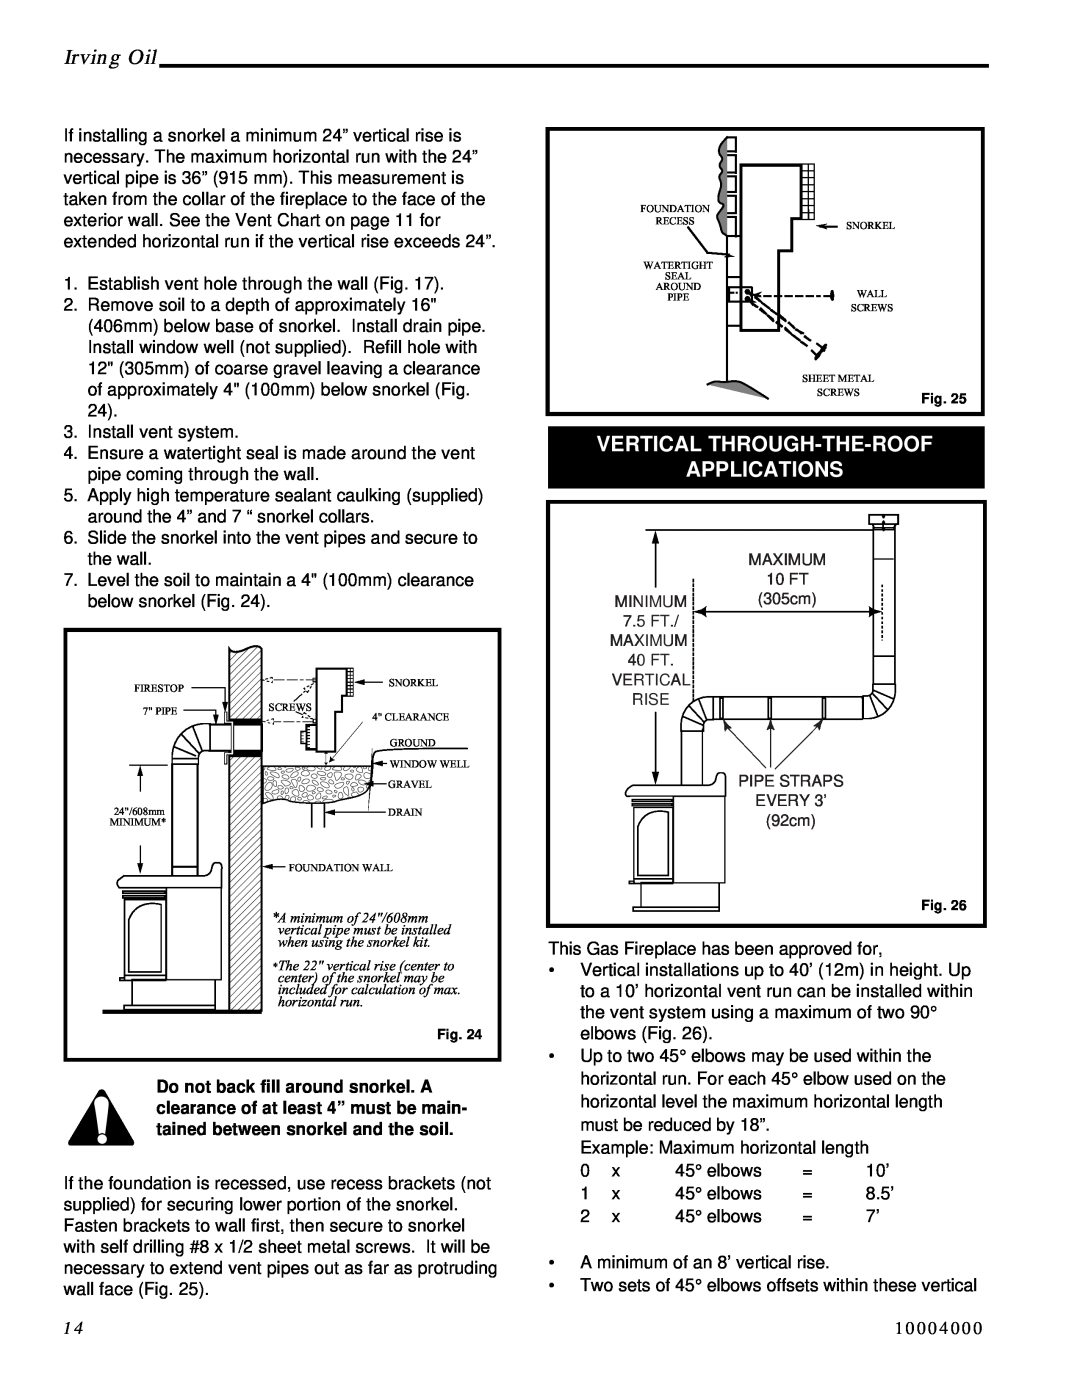 Vermont Casting IRFSDV34, IRFSDV24 installation instructions Vertical Through-The-Roof Applications, Irving Oil 